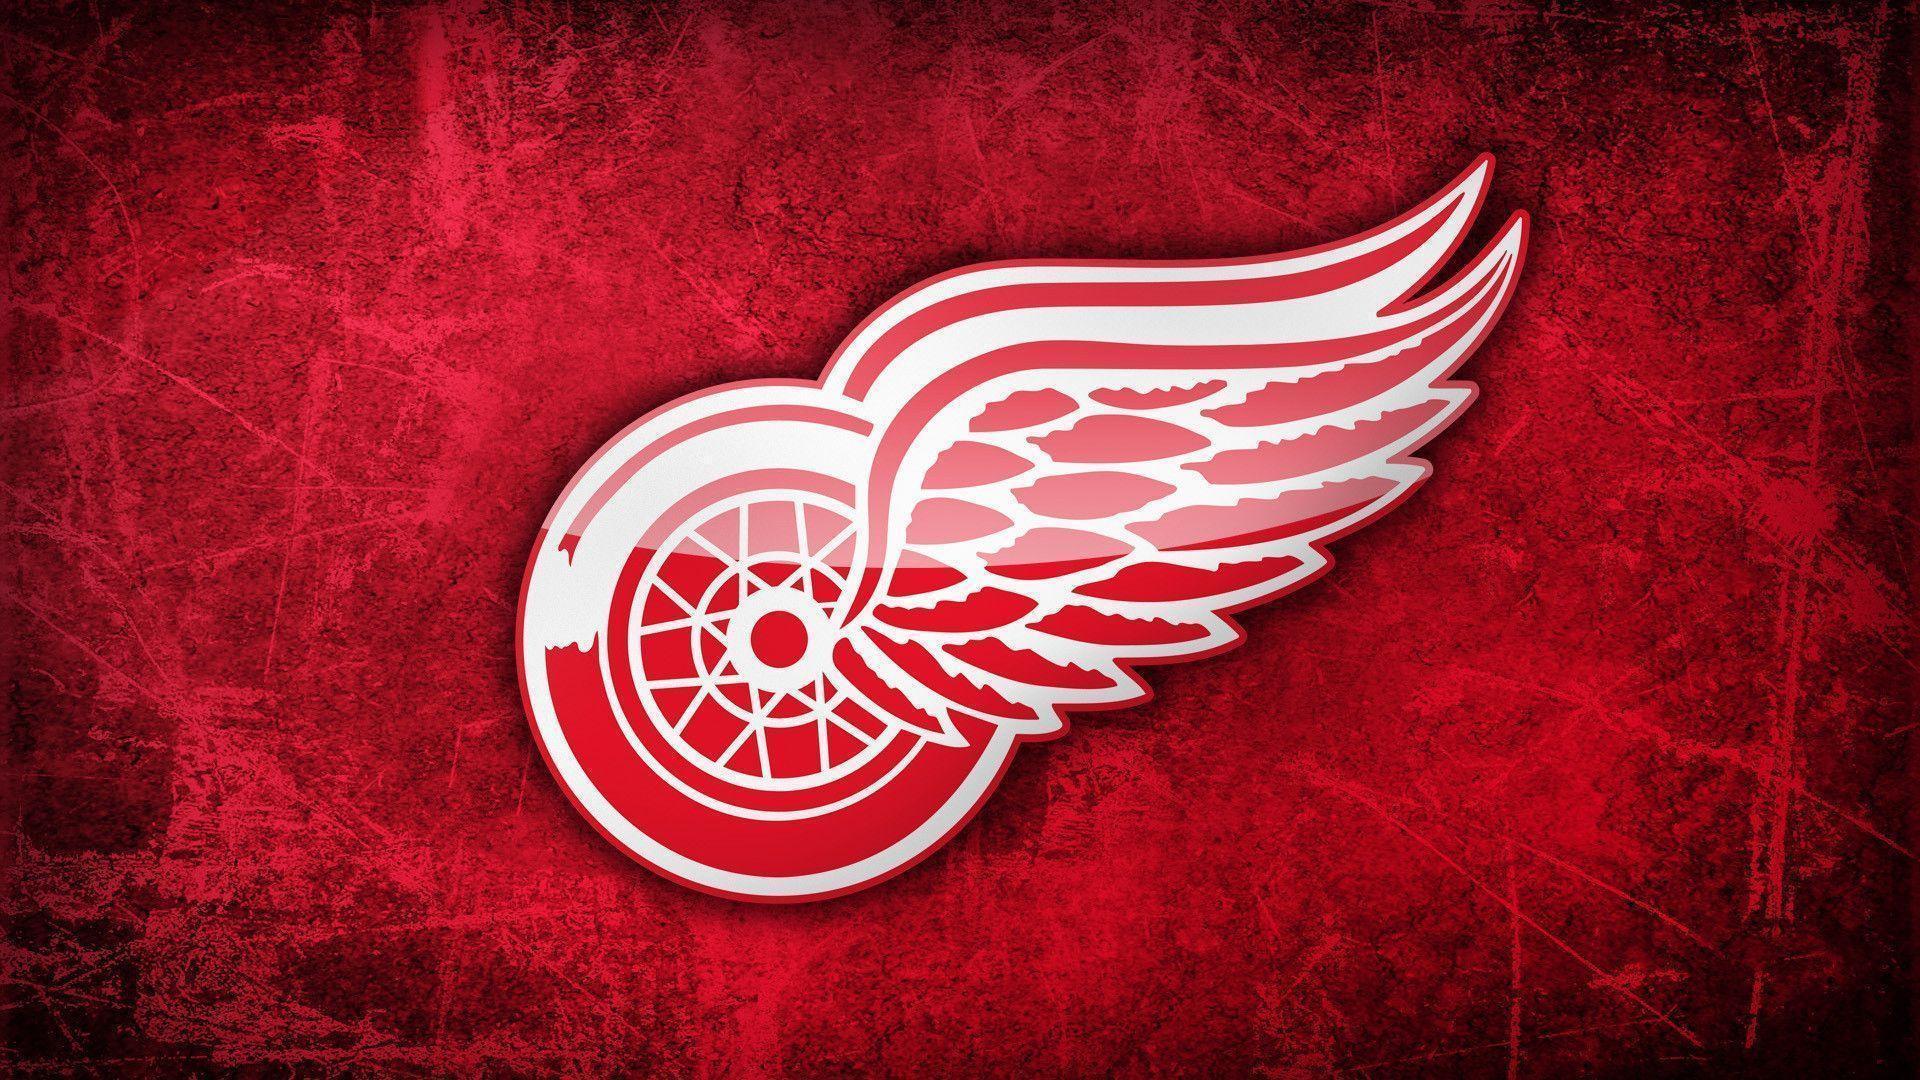 Wallpapers nhl, the nhl, detroit, red wings, detroit wallpapers